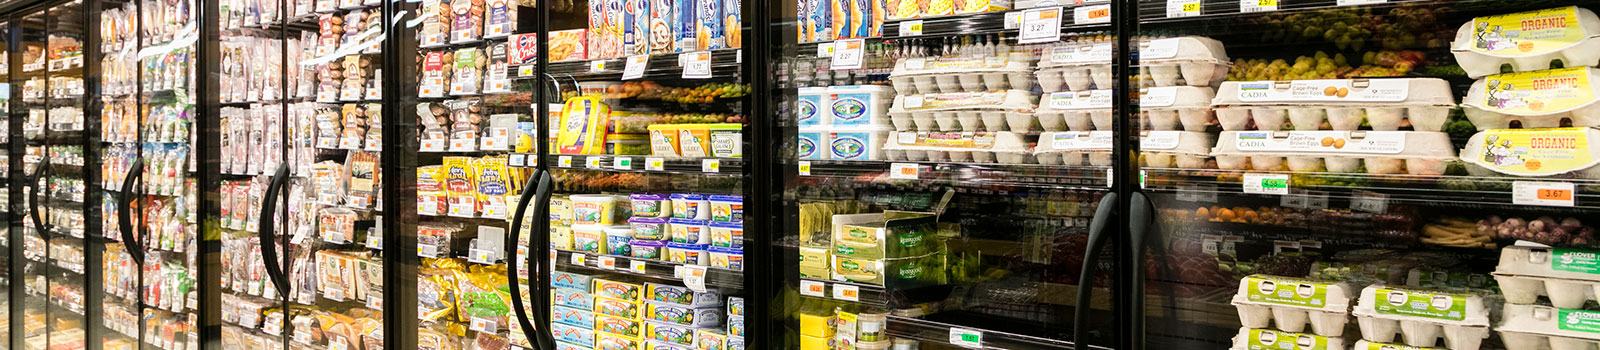 A well-designed and maintained fully-stocked supermarket cooler will run efficiently and could help reduce operating costs.